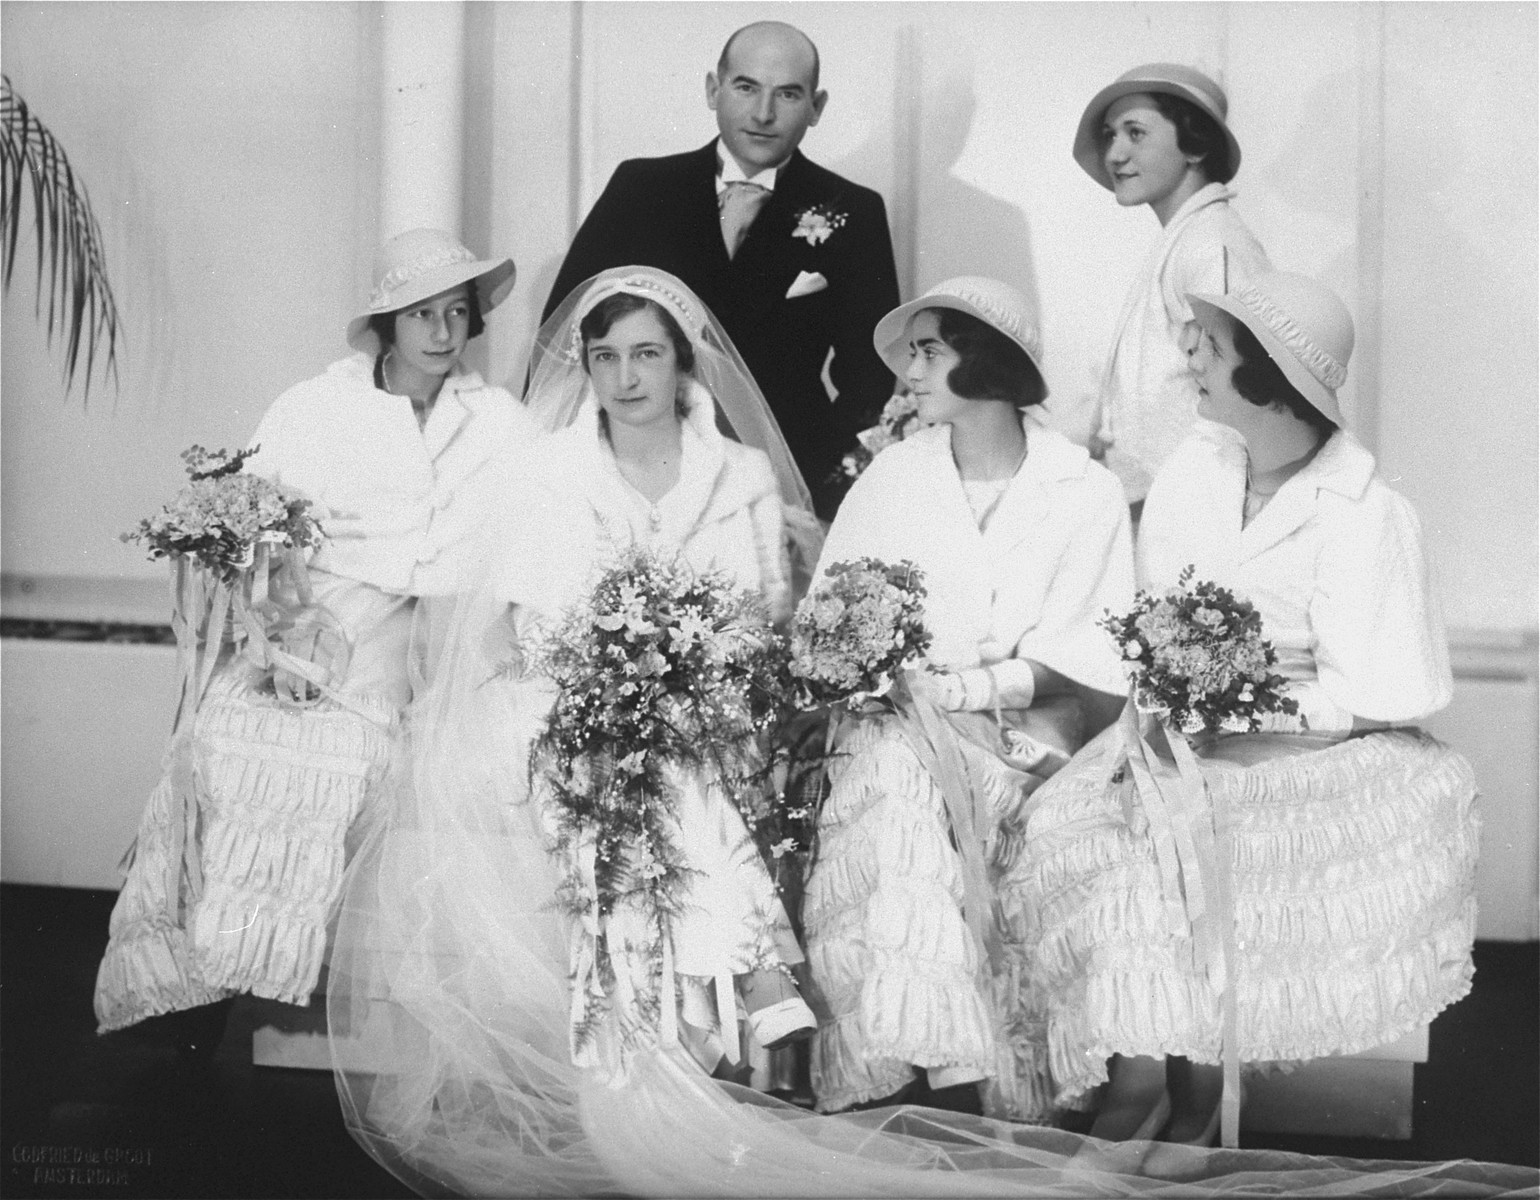 Group portrait of Hilde and Gerrit Verdoner with four bridesmaids on their wedding day.  

Pictured from left to right are: Jetty Fontijn, Hilde Verdoner, Letty Stibbe, and Miepje Sluizer; standing behind them is Fanny Schoenfeld.